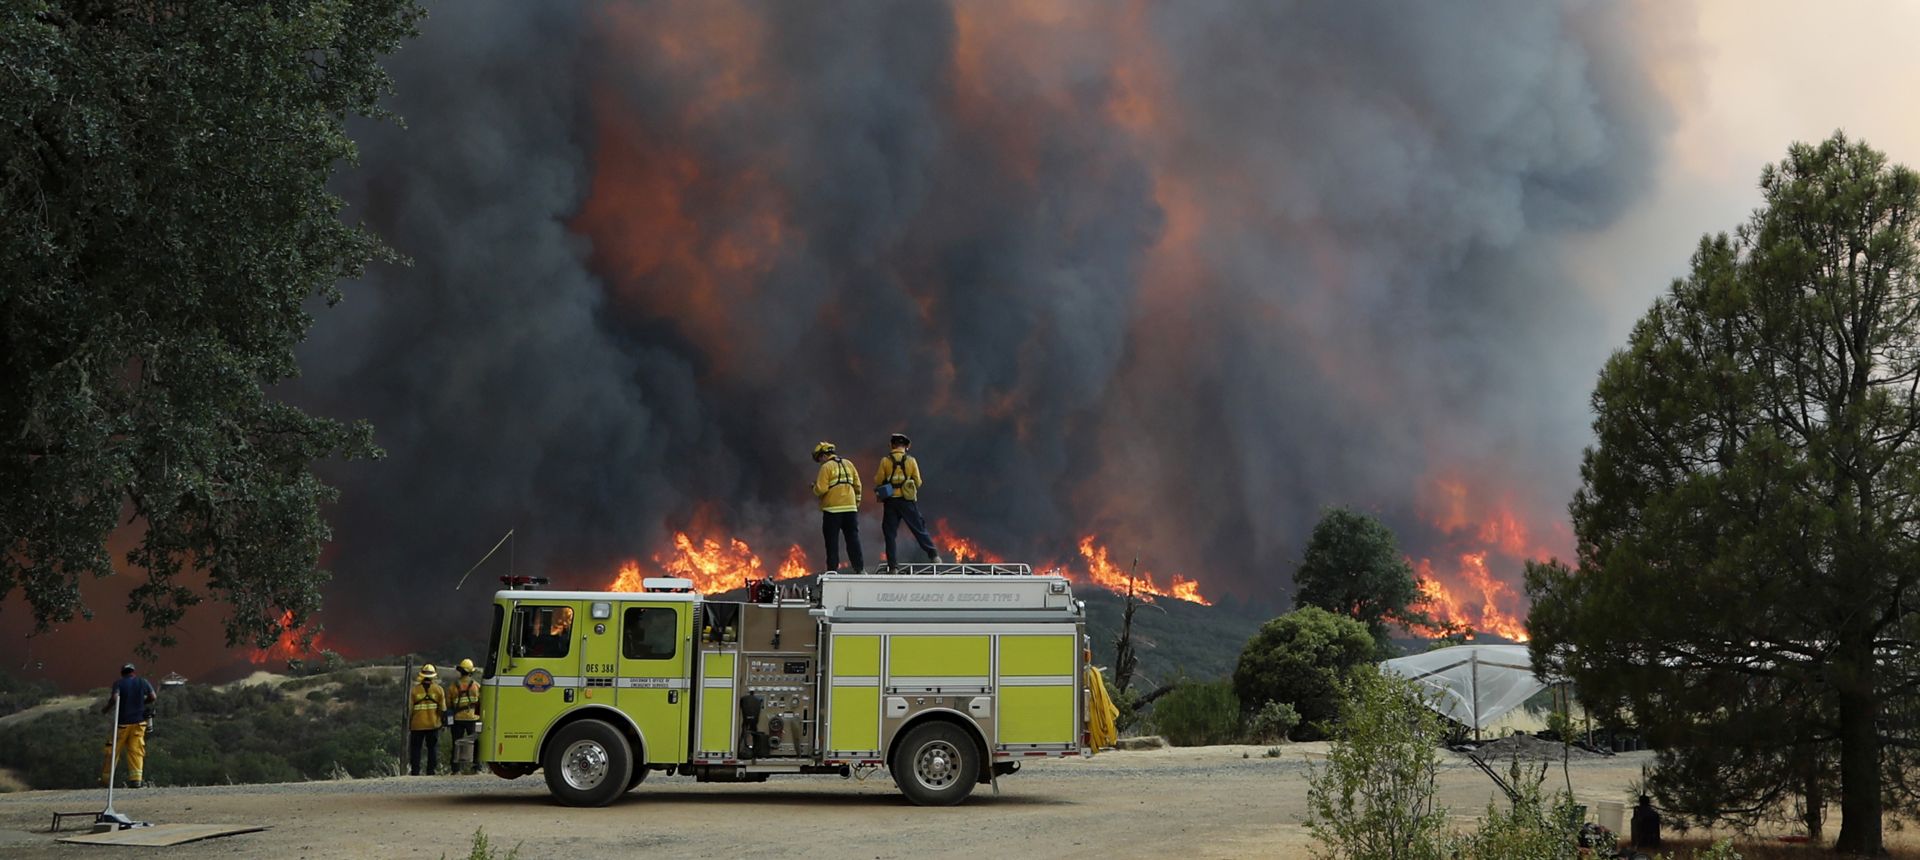 epa06921025 A hillside erupts in flames and heavy smoke from the River Fire as fire fighters look on in Lakeport, California, USA, 31 July 2018. The River and Ranch fire combined as the Mendocino Complex Fire.  EPA/JOHN G. MABANGLO